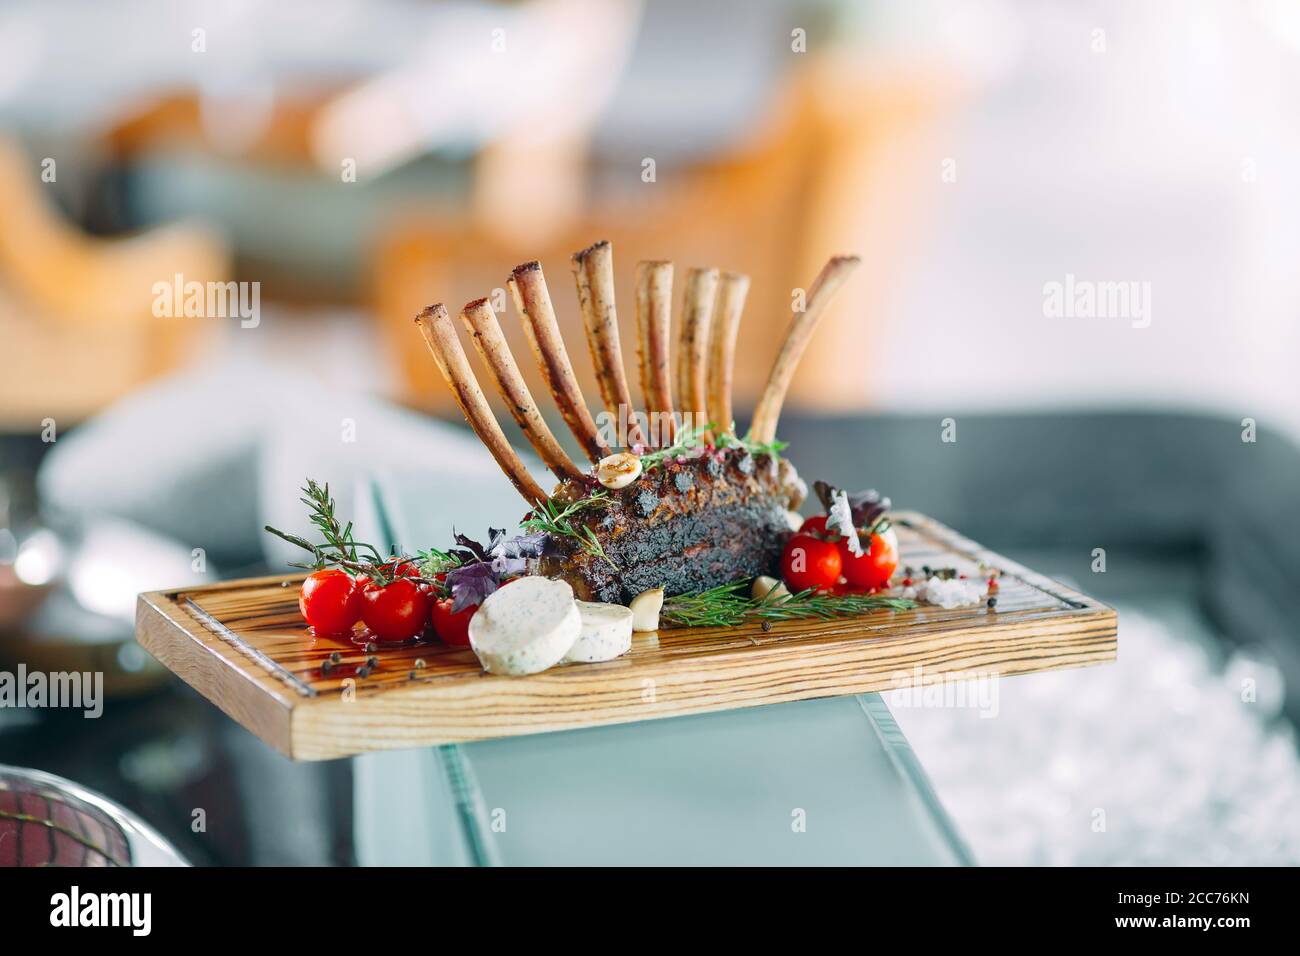 Dish Rack of Lamb with tomatoes on a wooden tray. Stock Photo